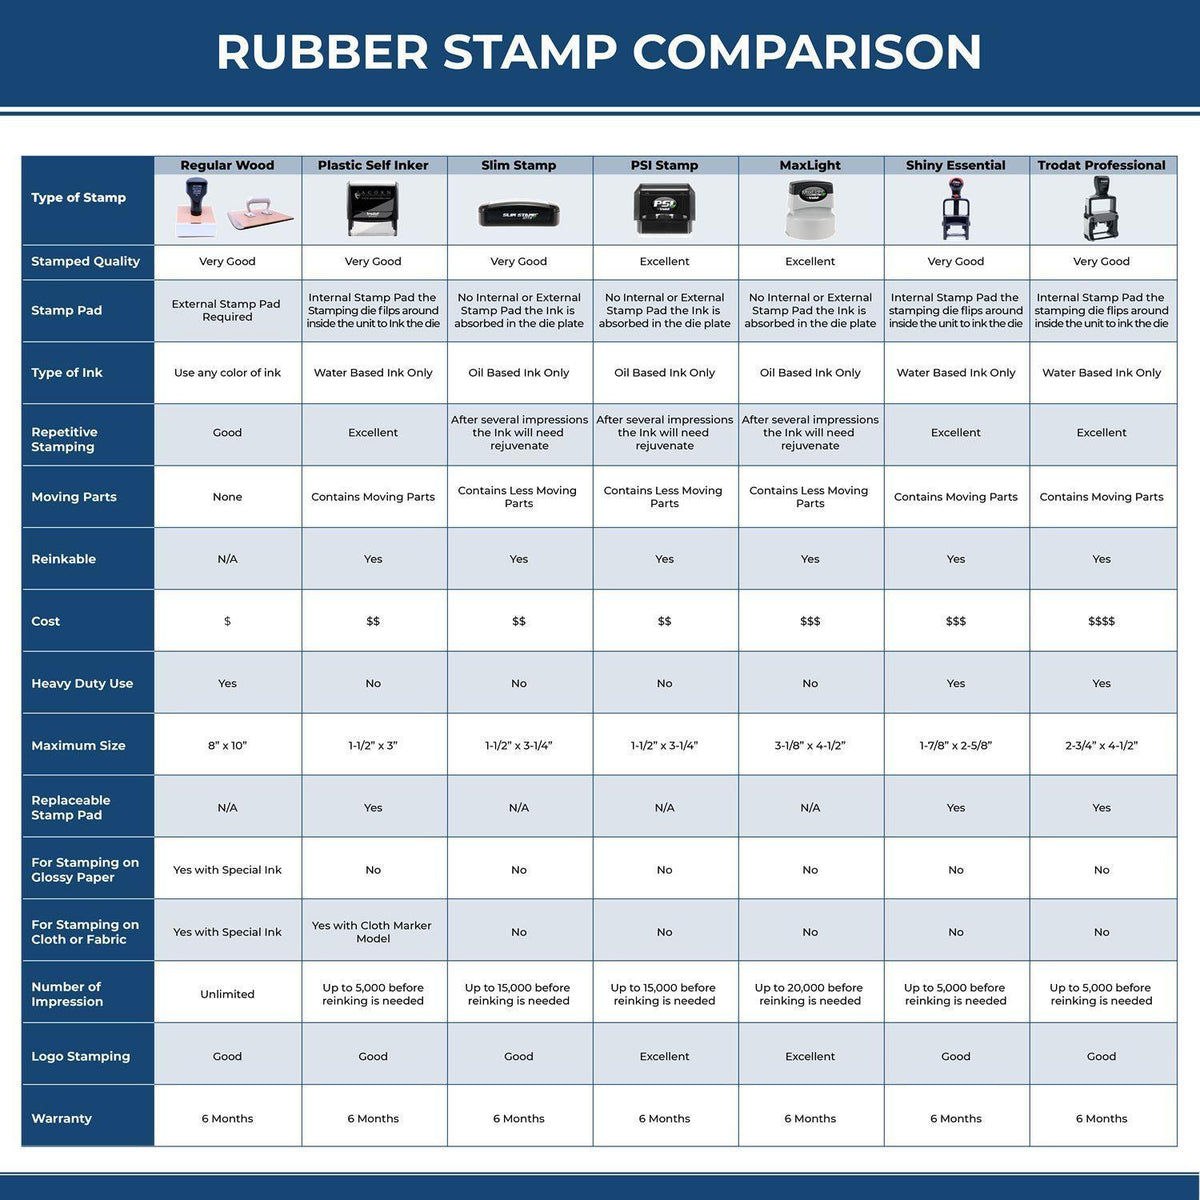 Large Classified Rubber Stamp 4888R Rubber Stamp Comparison